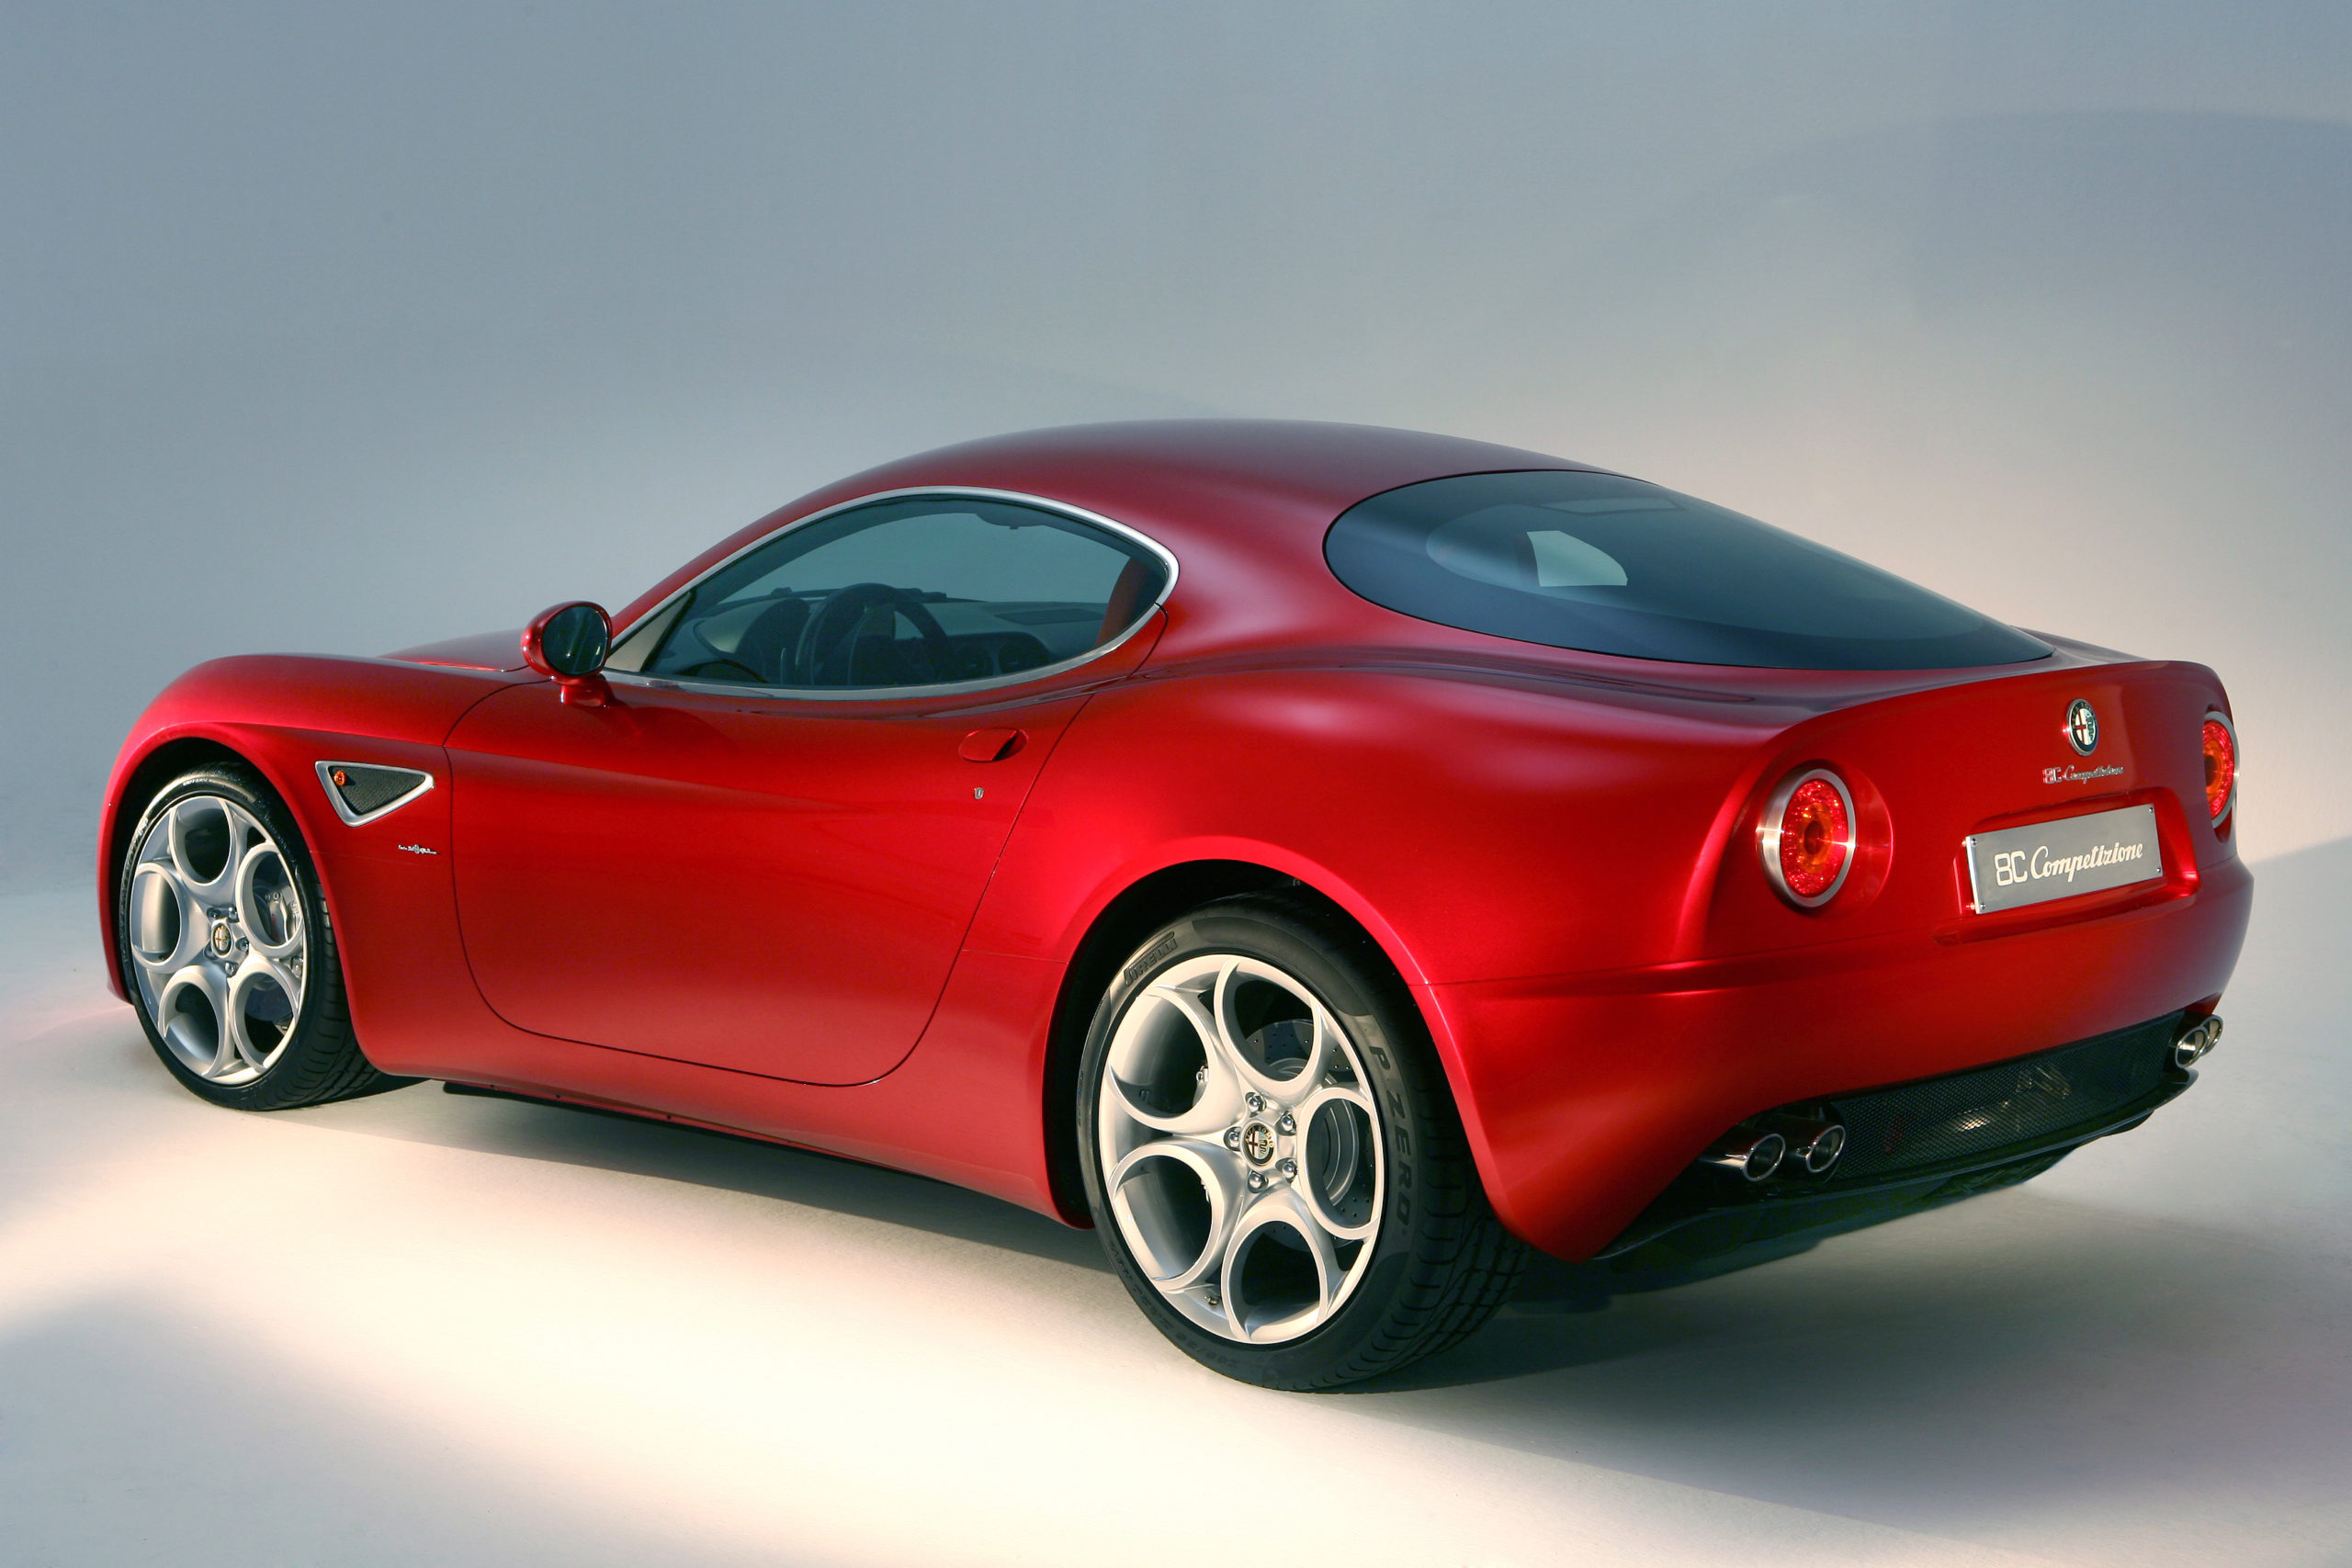 The 8C Competizione follows the traditional transaxle set up of the Alfetta and 75, the engine is front-mounted and longitudinal, while both gearbox and drive are rear-mounted for a perfect weight balance